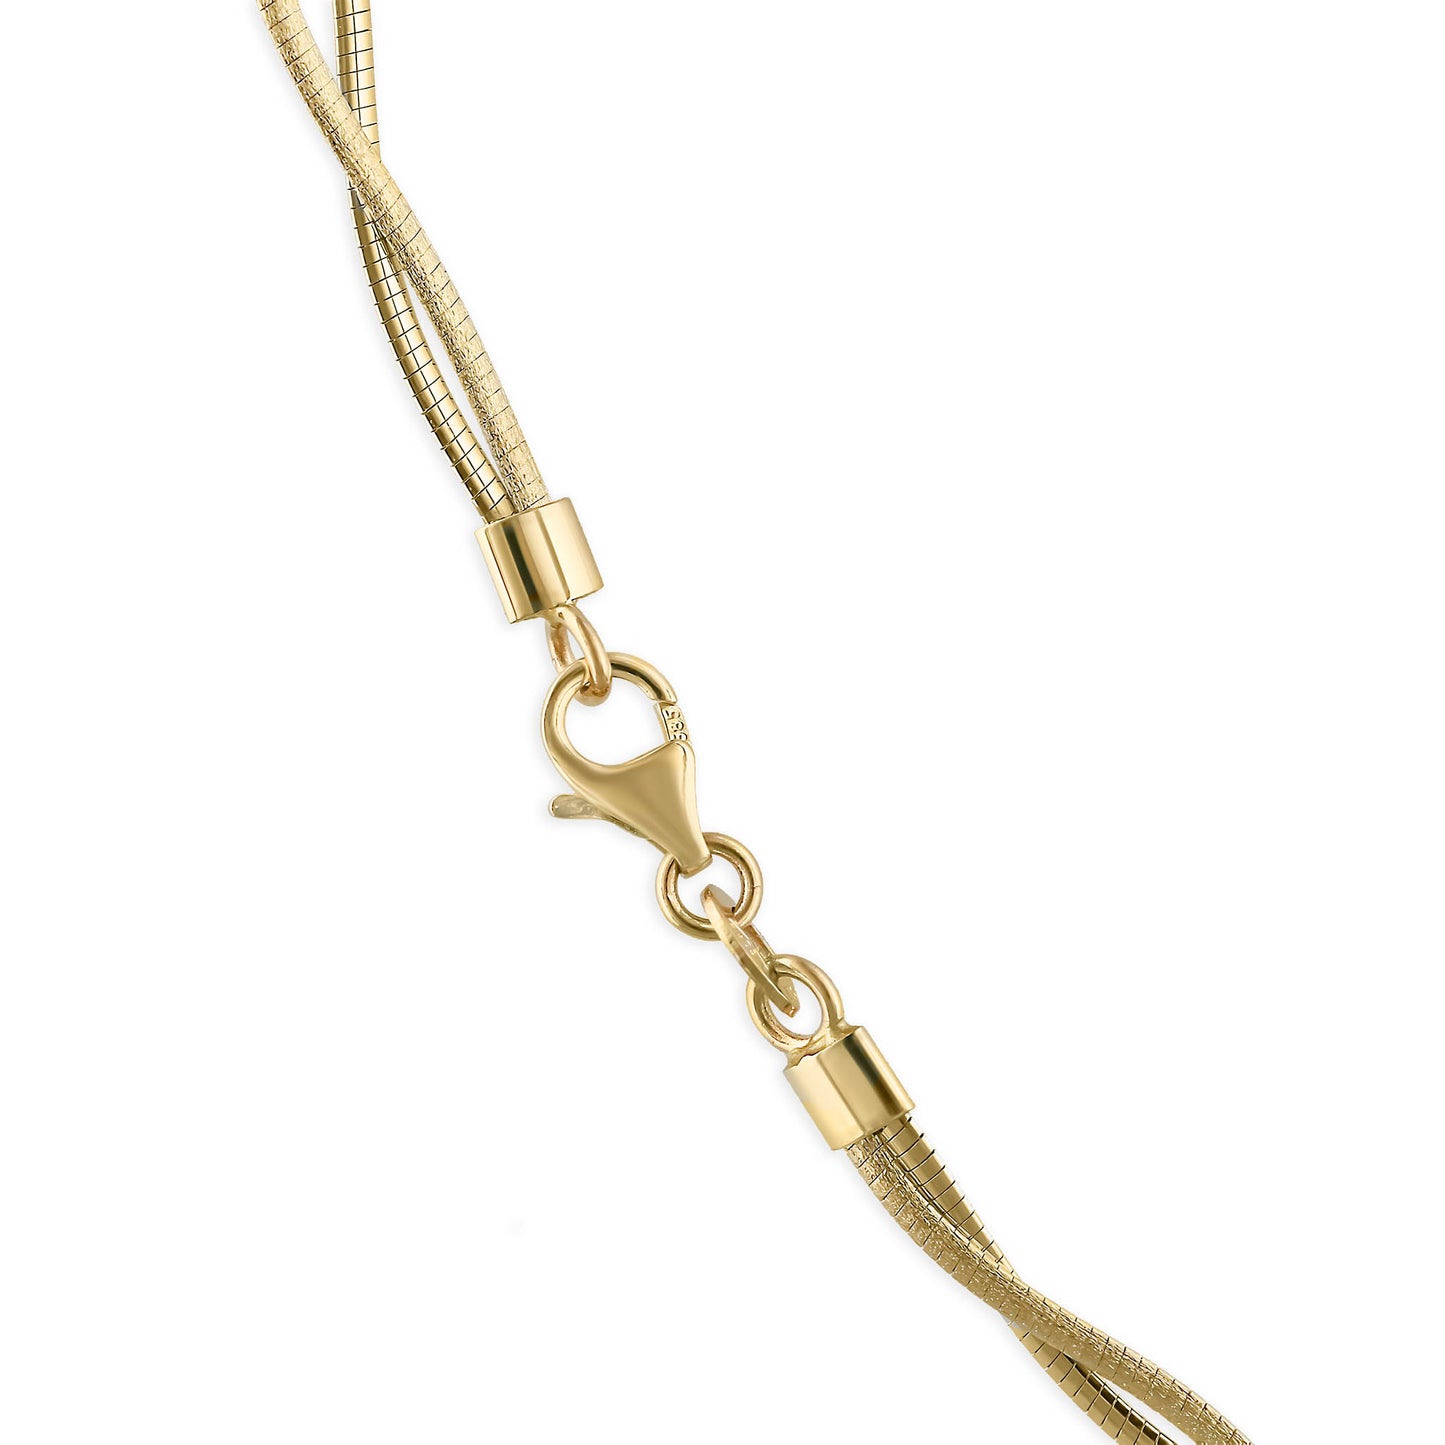 762182 - 14K White Gold and 14K Yellow Gold - 17" Twisted Two-Toned Omega Necklace